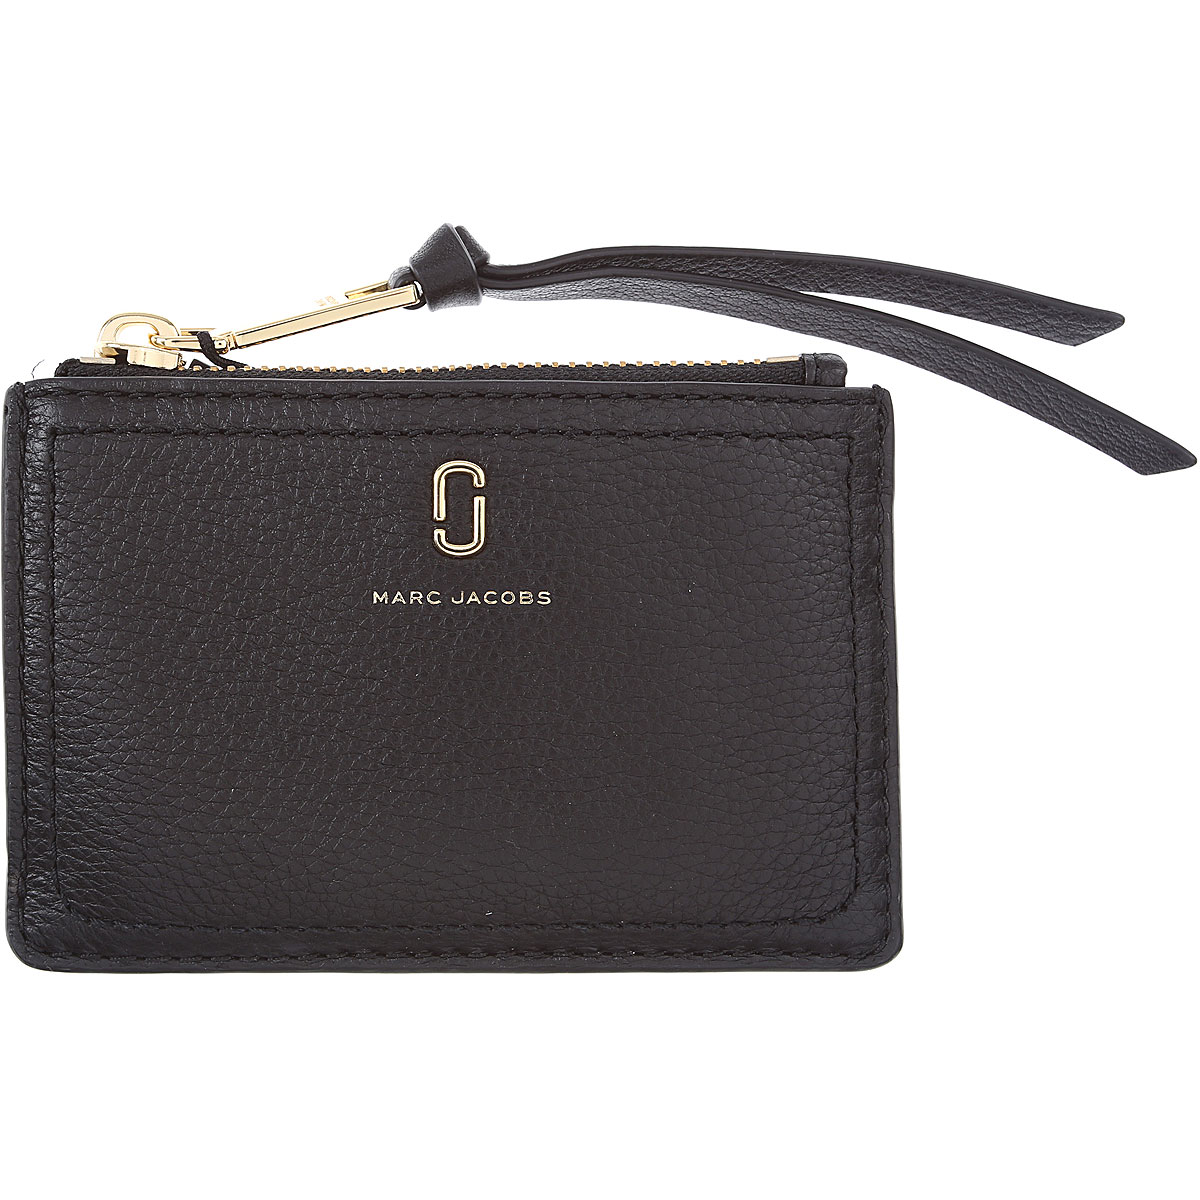 Womens Wallets Marc Jacobs, Style code: m0015123-001-